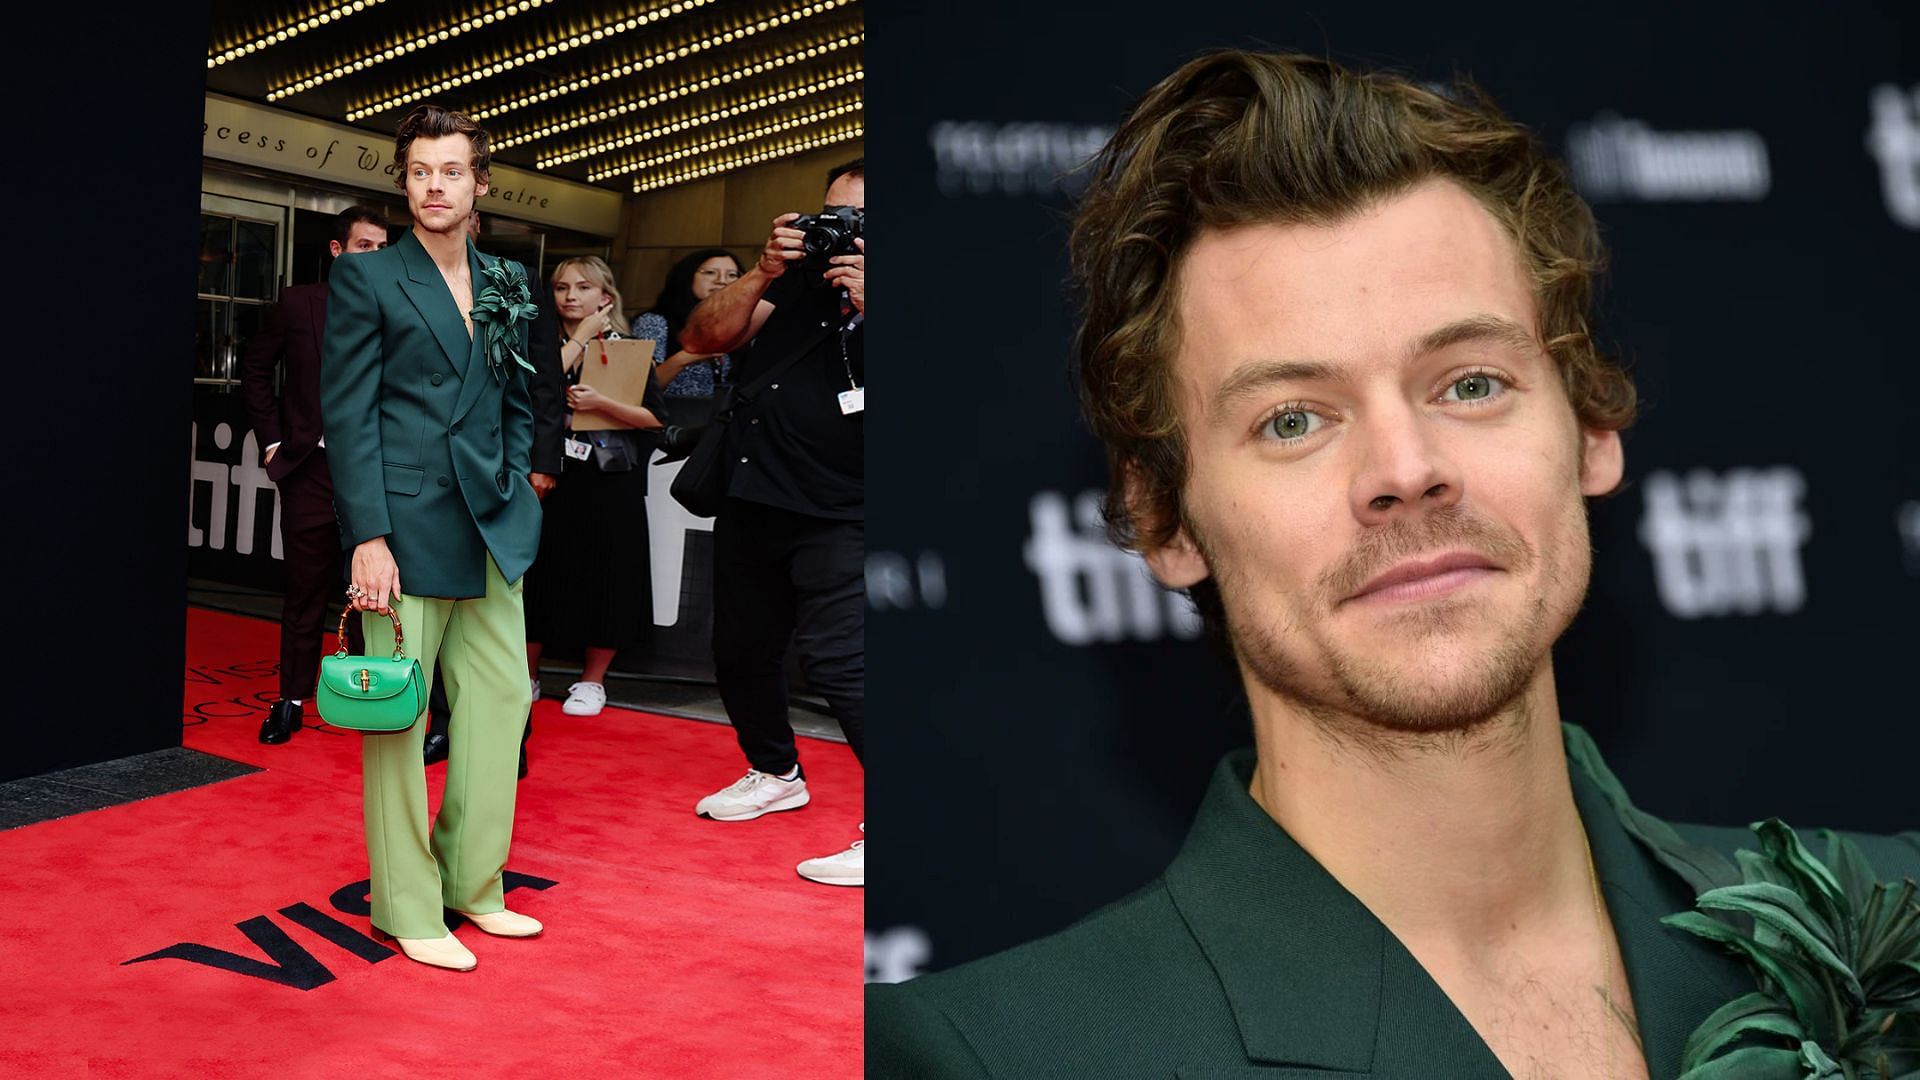 Styles at the red carpet of Toronto International Film Festival (Image via Gucci)